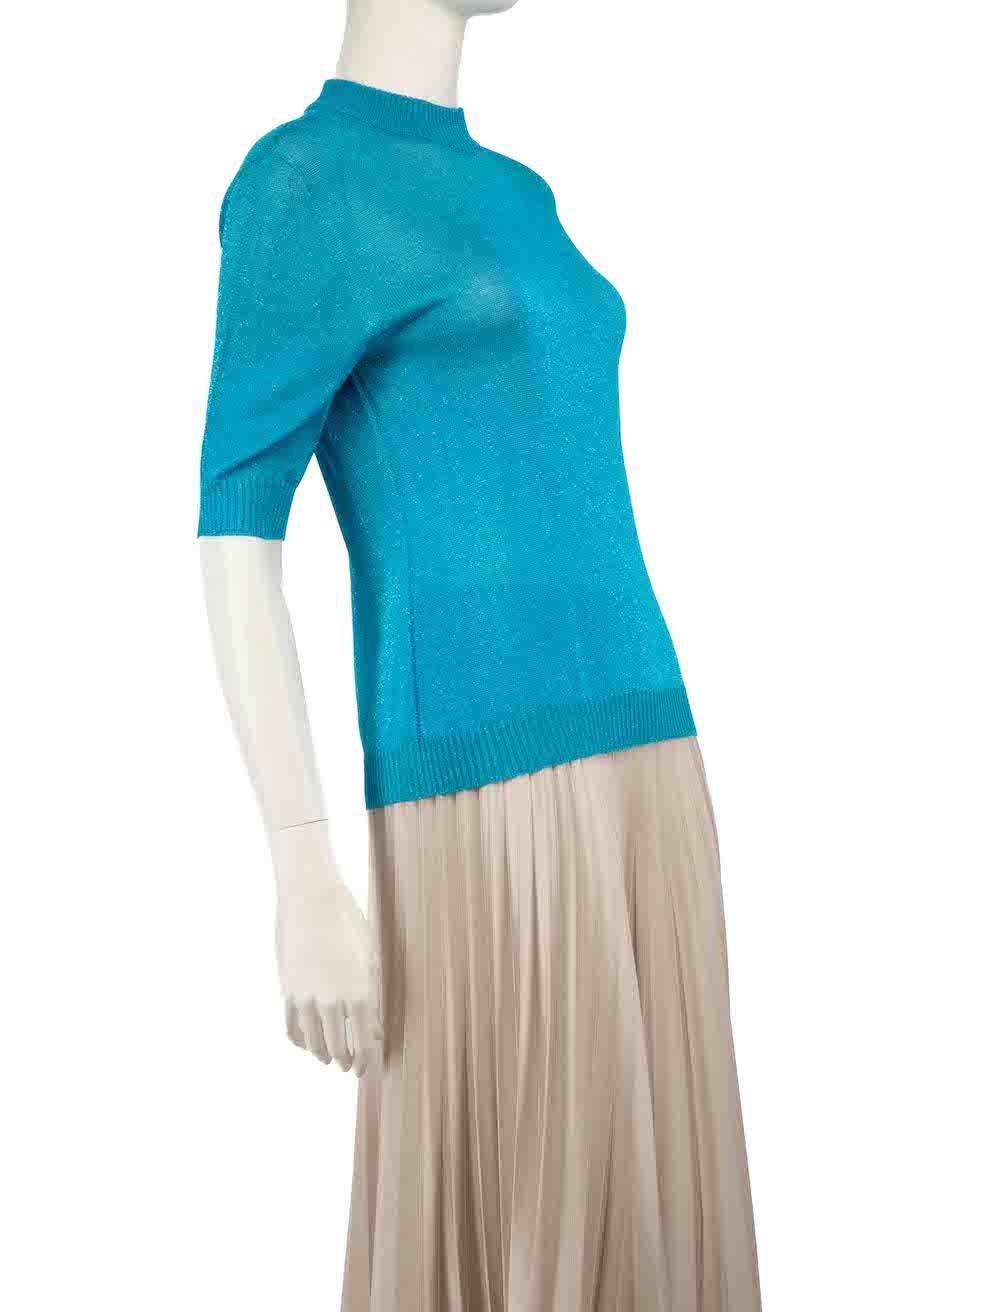 CONDITION is Very good. Hardly any visible wear to top is evident on this used Missoni designer resale item.
 
 
 
 Details
 
 
 Blue
 
 Viscose
 
 Knit top
 
 Metallic thread
 
 Short sleeves
 
 Round neck
 
 Sheer
 
 Back button fastening
 
 
 
 
